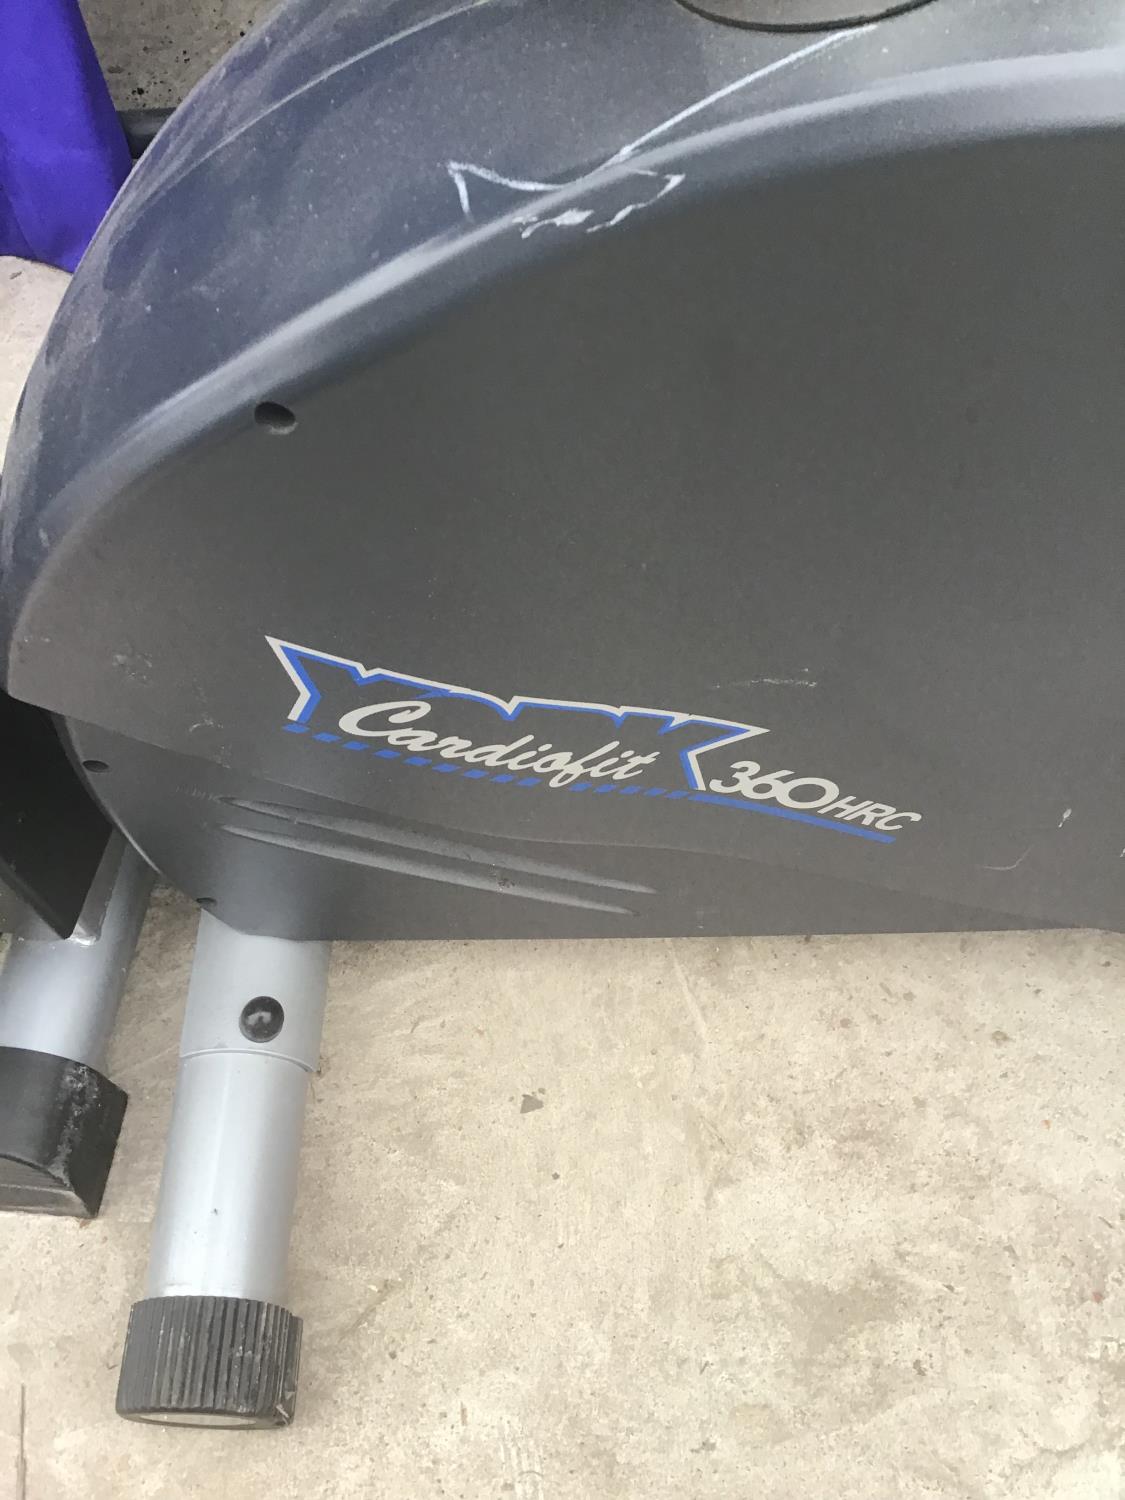 A YORK CARDIOFIT 360HRC EXERCISE BIKE - Image 2 of 3